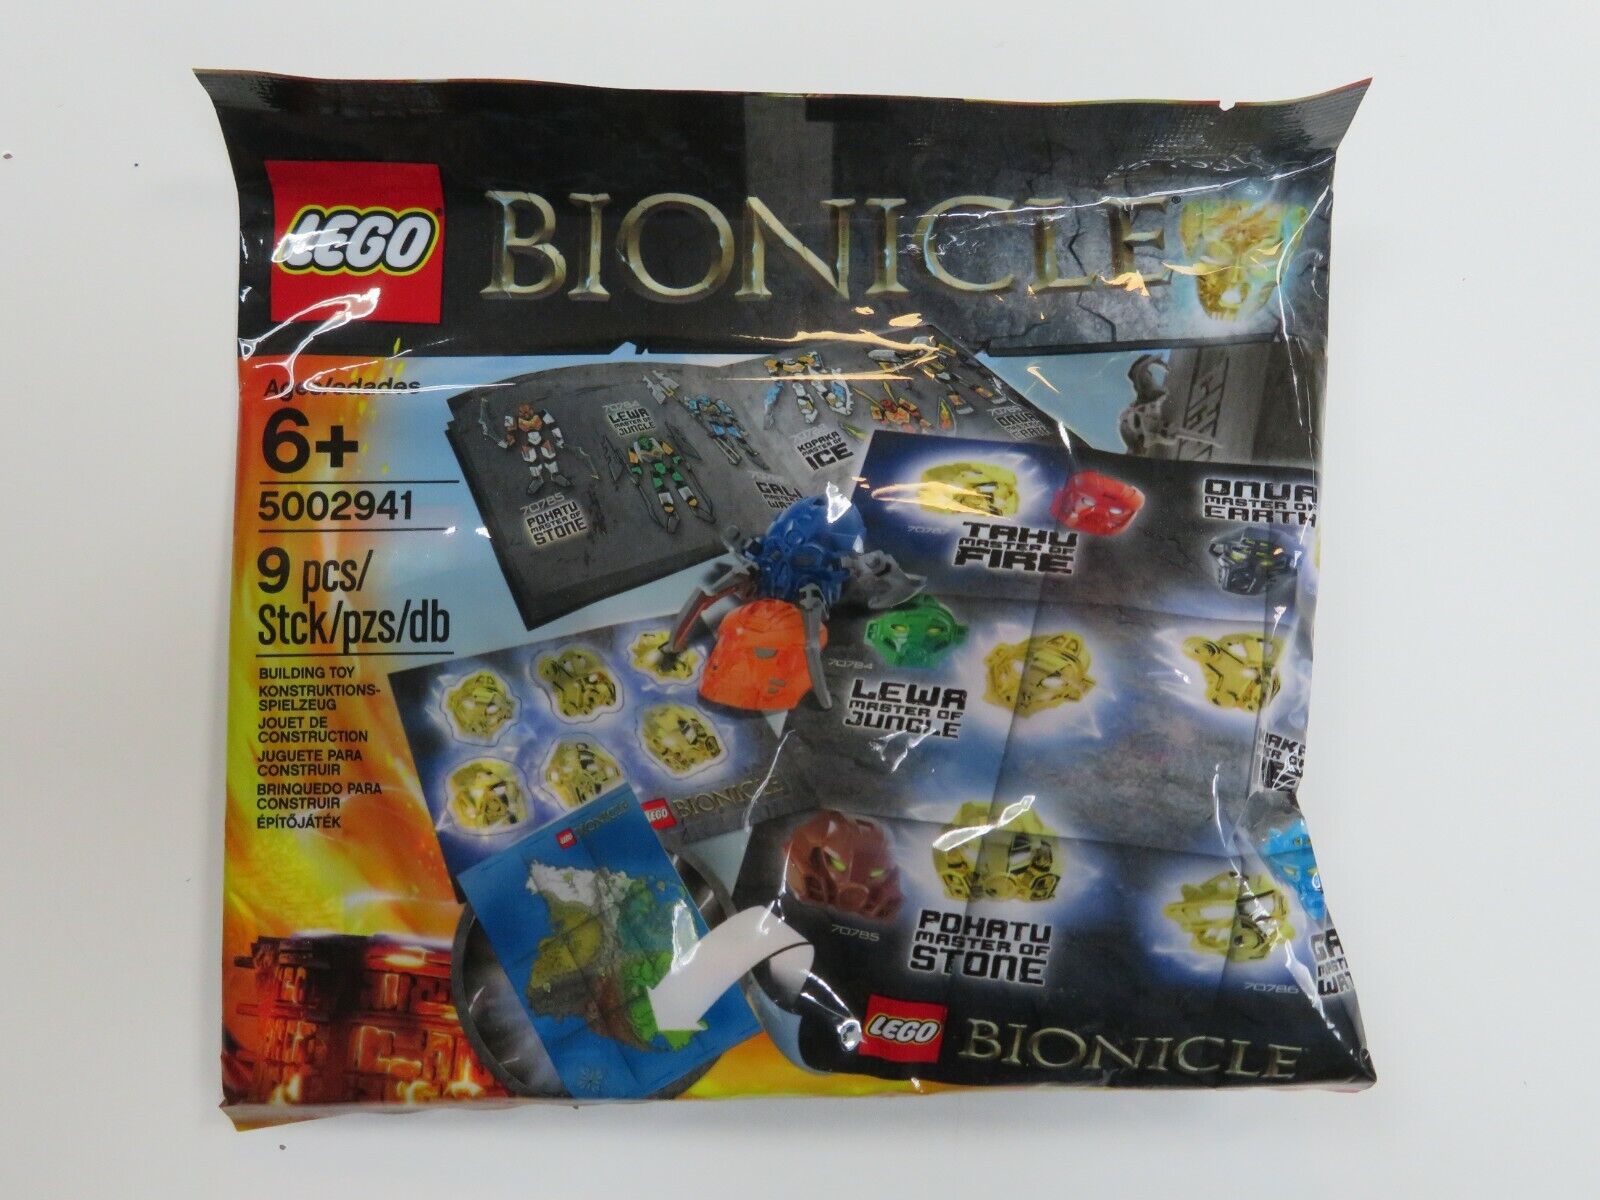 LEGO Bionicle - 5002941 - 9 pieces - Bionicle Hero Pack FREE SHIPPING!!